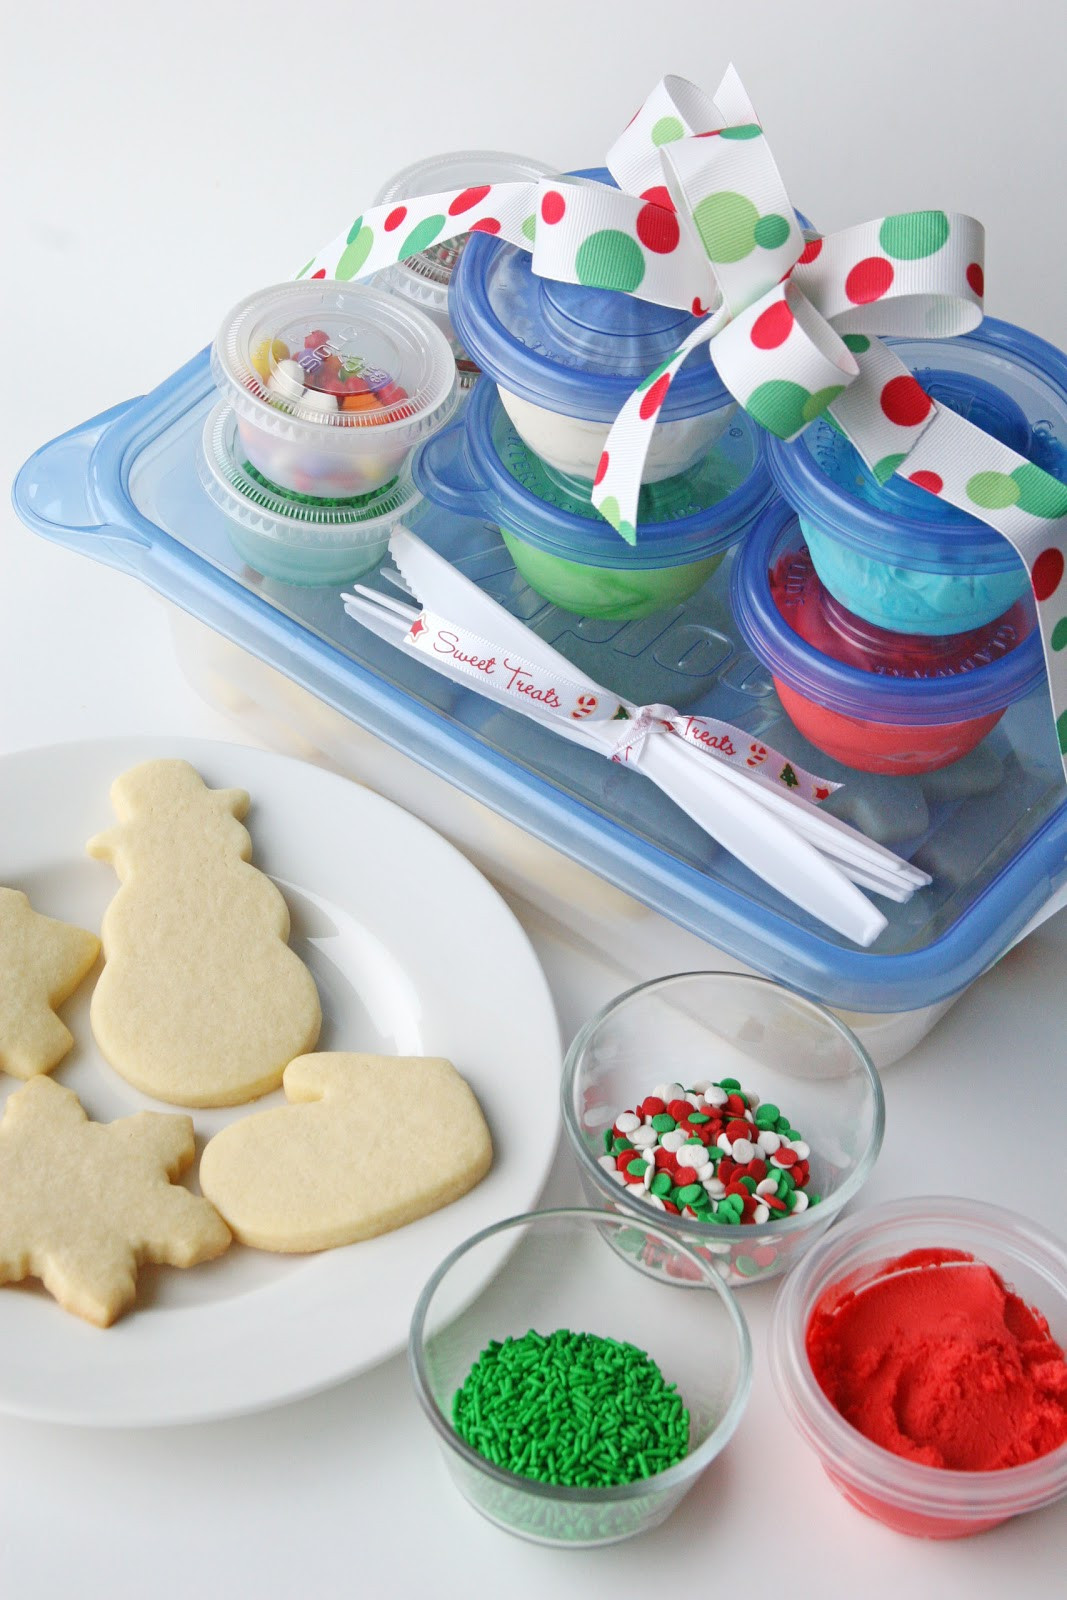 Christmas Cookies Decorating Kit
 Cookie Decorating Kits for Kids and Easy Butter Frosting